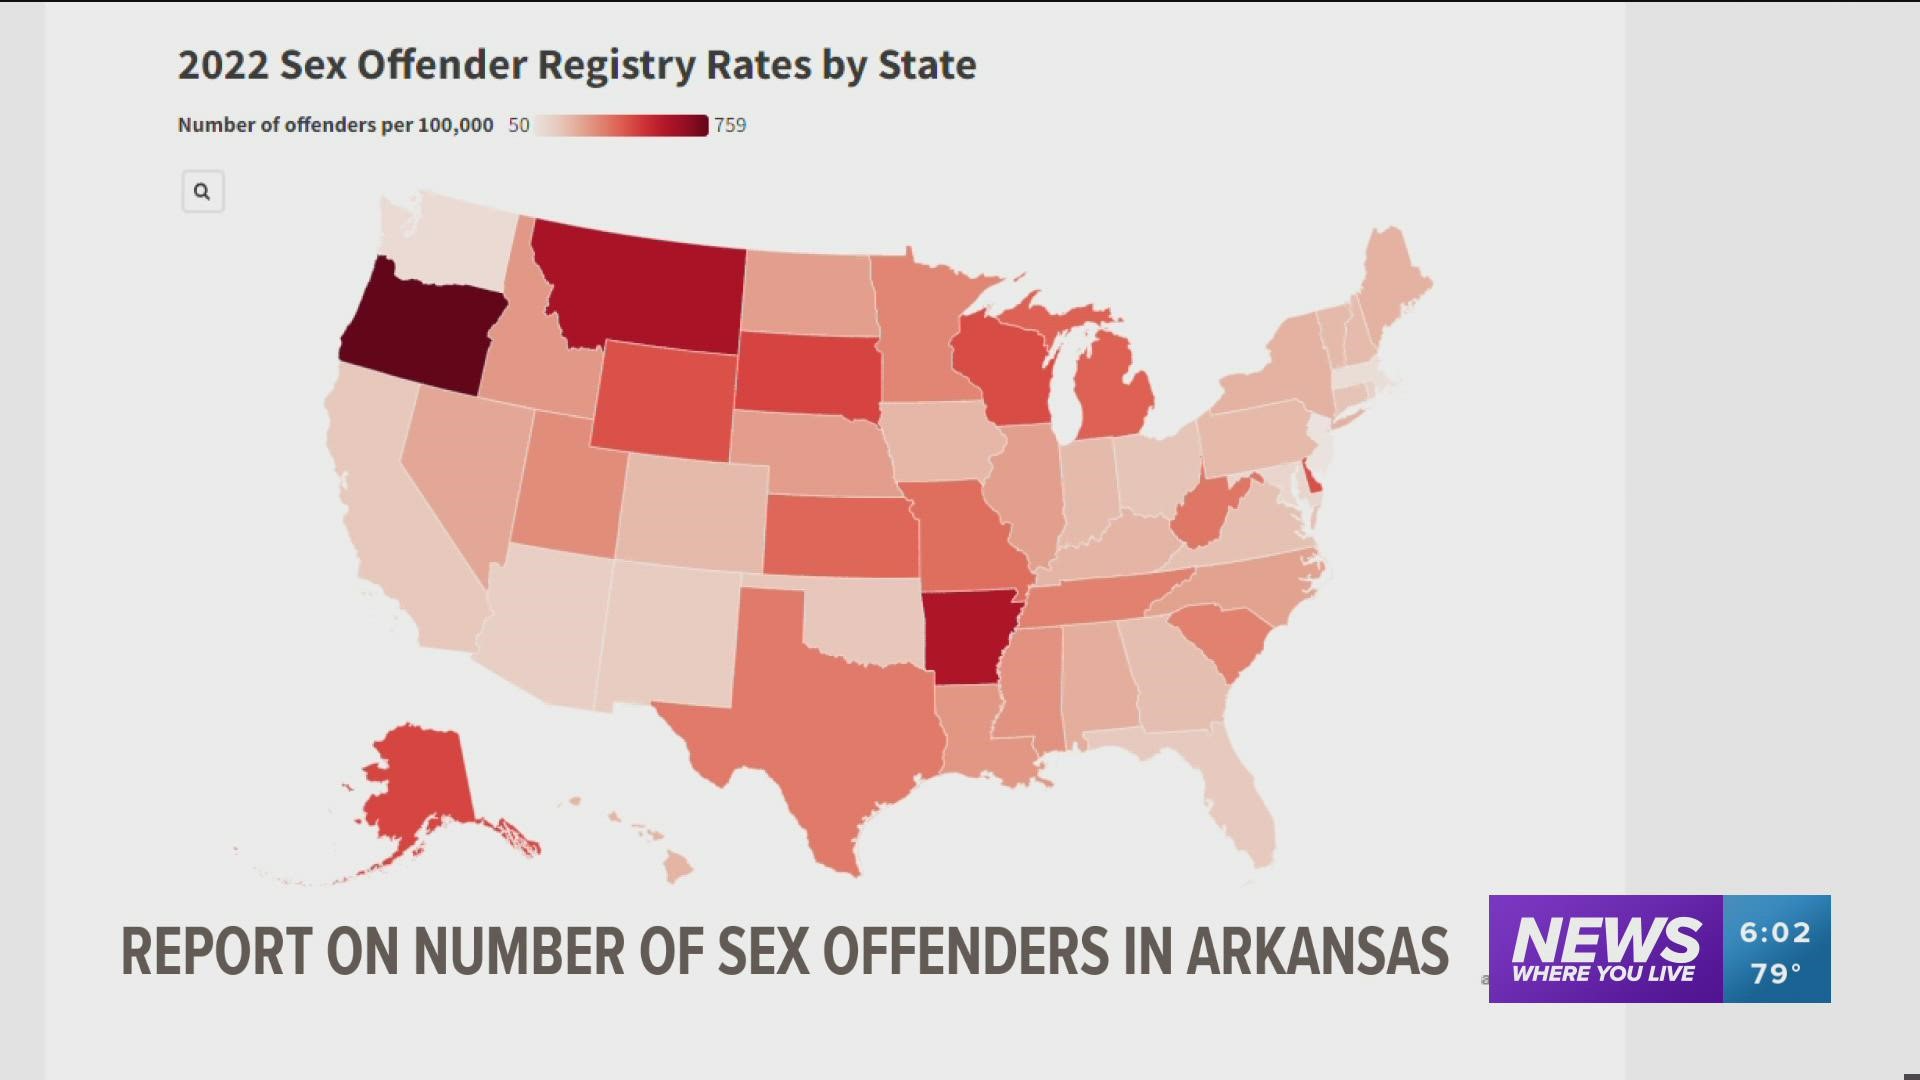 There are 767,000 registered sex offenders across the nation and 18,000 live in Arkansas.